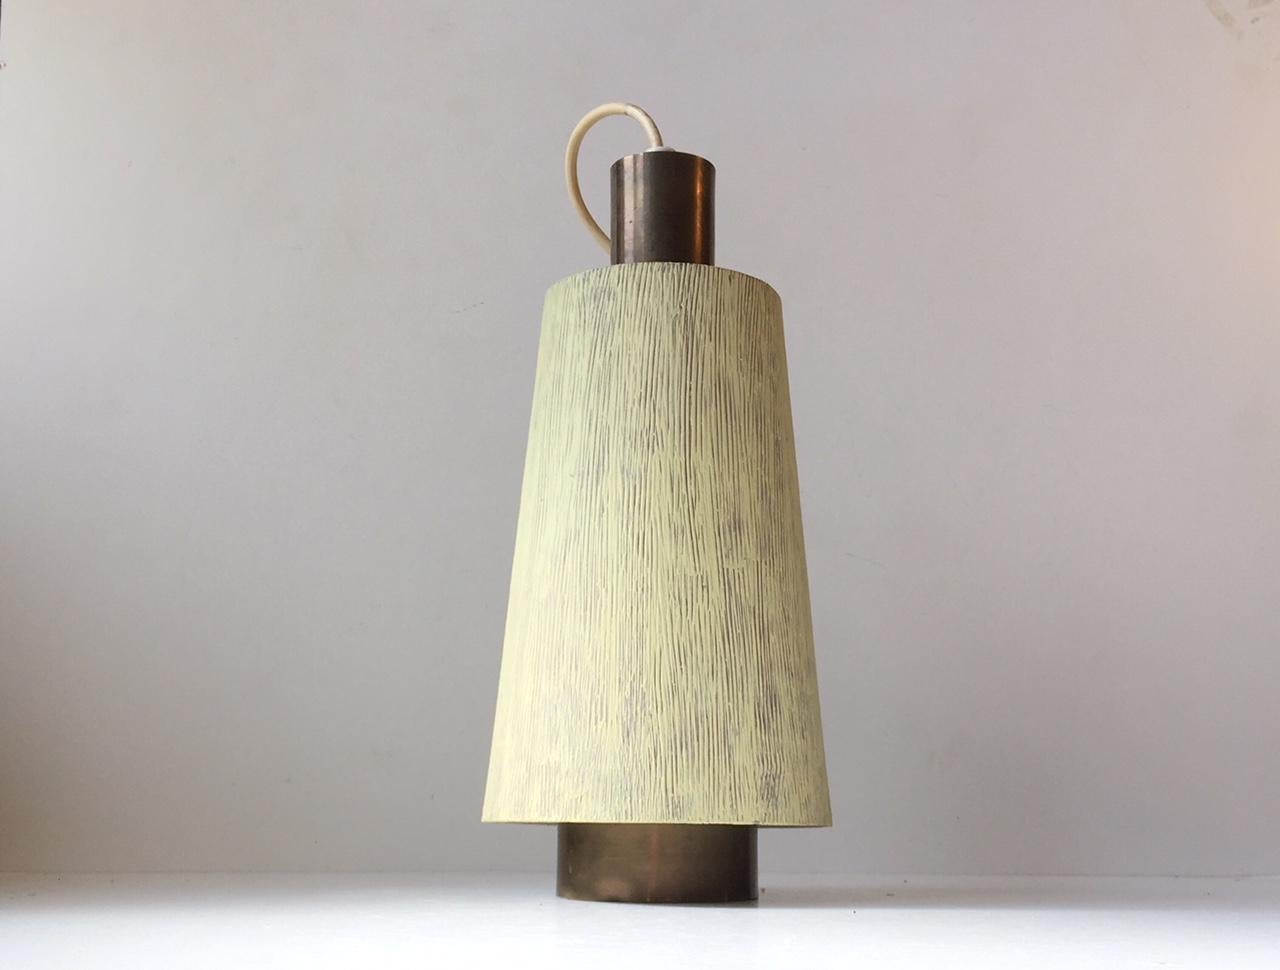 This vintage pendant light is made from solid brass and decorated with a textured light green/yellow paint to the external shade. It was manufactured by Lyfa and is in the style of Paavo Tynell and Lisa Johansson-Pape. Measurements: H: 32, Diameter: